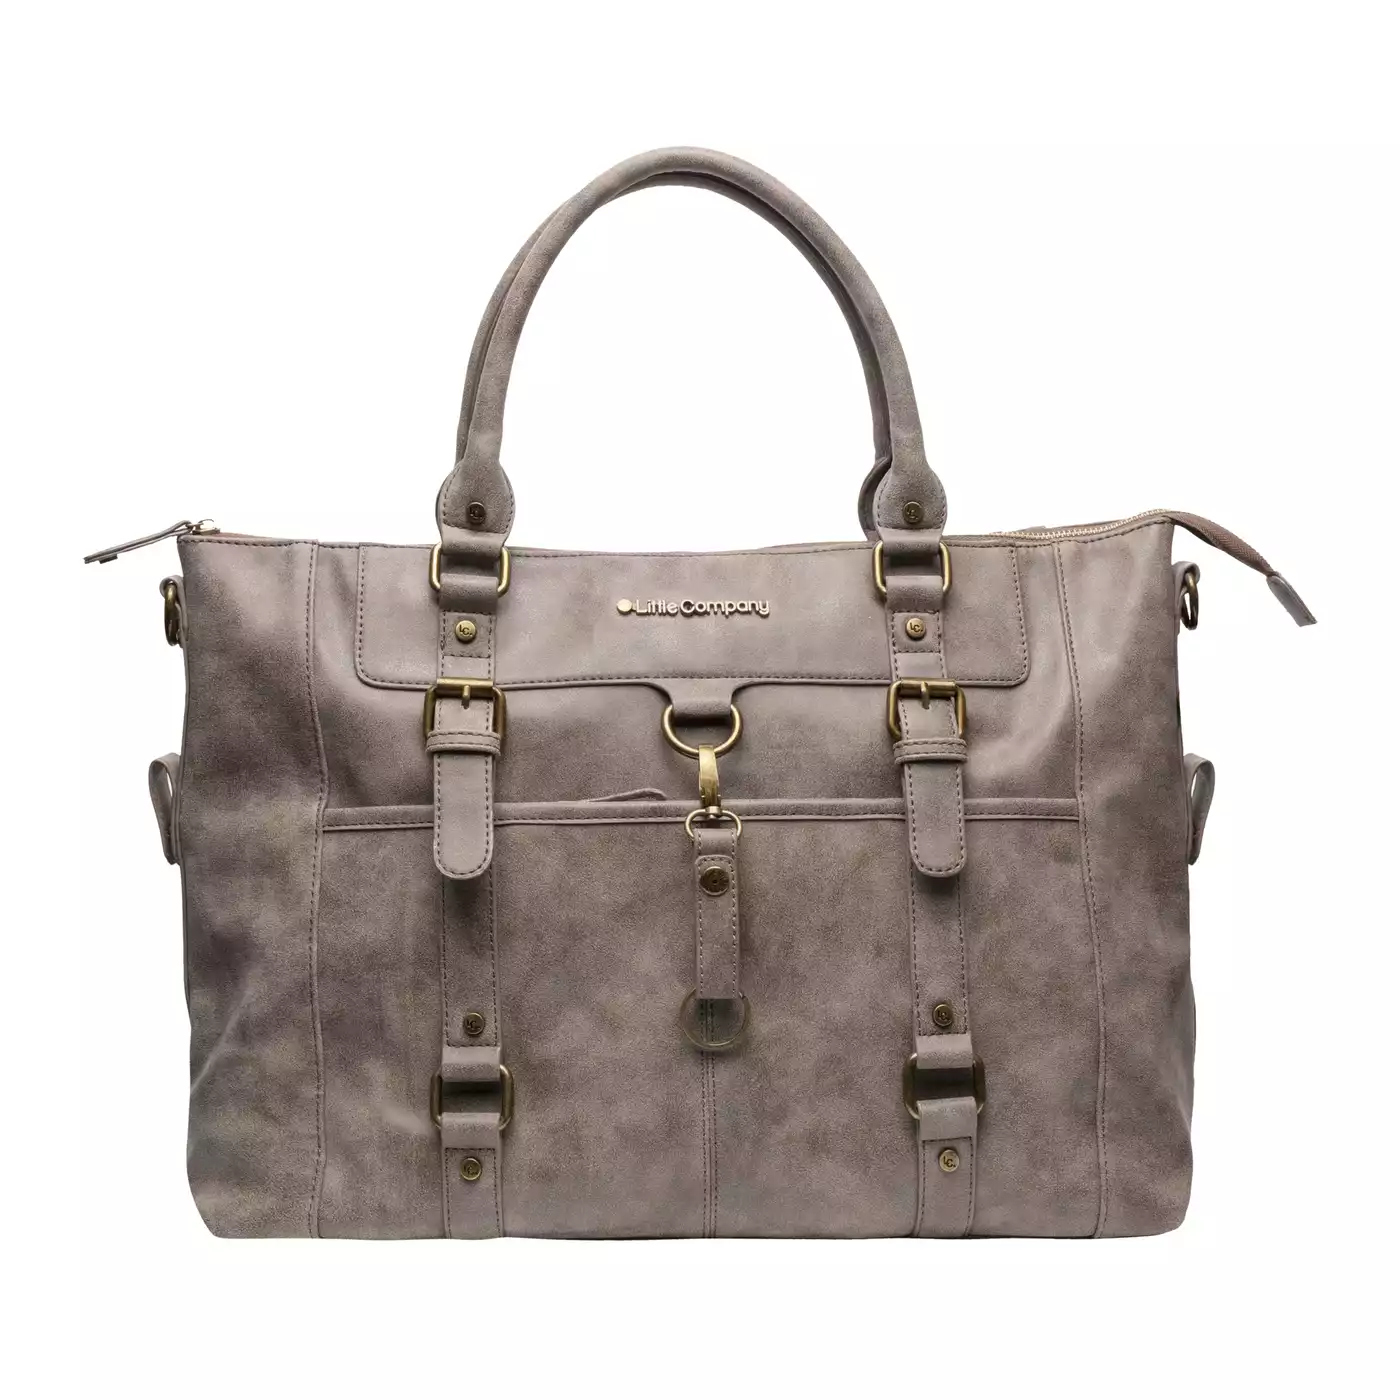 Wickeltasche Helsinki solid taupe Little Company Beige Taupe 2000576181309 3